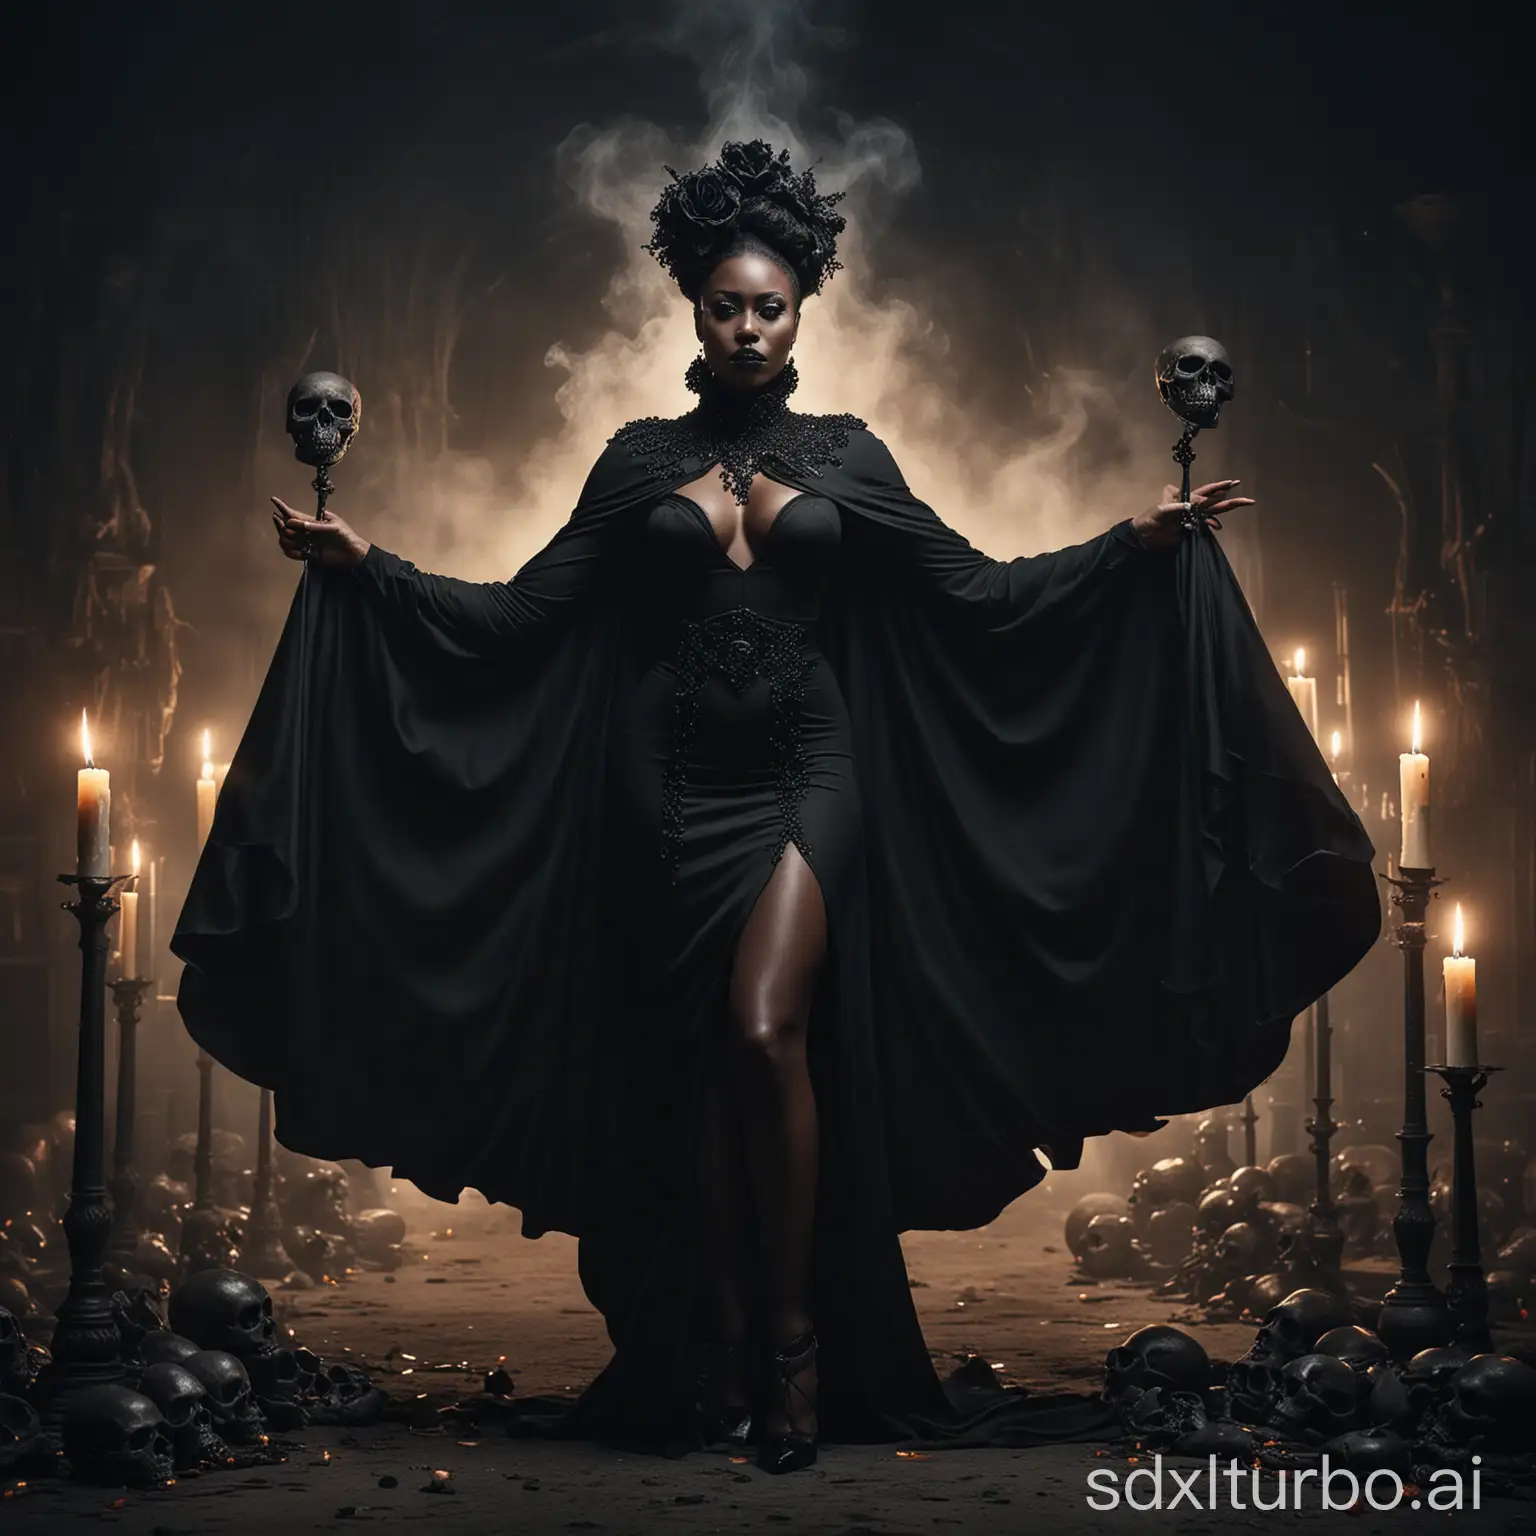 A captivating and dynamic photo of a powerful and majestic black woman, radiating an aura of authority and grace. She is dressed in a dark, elegant attire, with a cape adorned with a high collar that accentuates her strong presence. Her black makeup and high heels enhance her imposing demeanor, while the presence of two skulls on each side, each with a lit black candle, creates a mysterious and enchanting atmosphere. The scene is masterfully crafted, combining elements of mystery, power, and cinematic beauty into a mesmerizing visual experience.